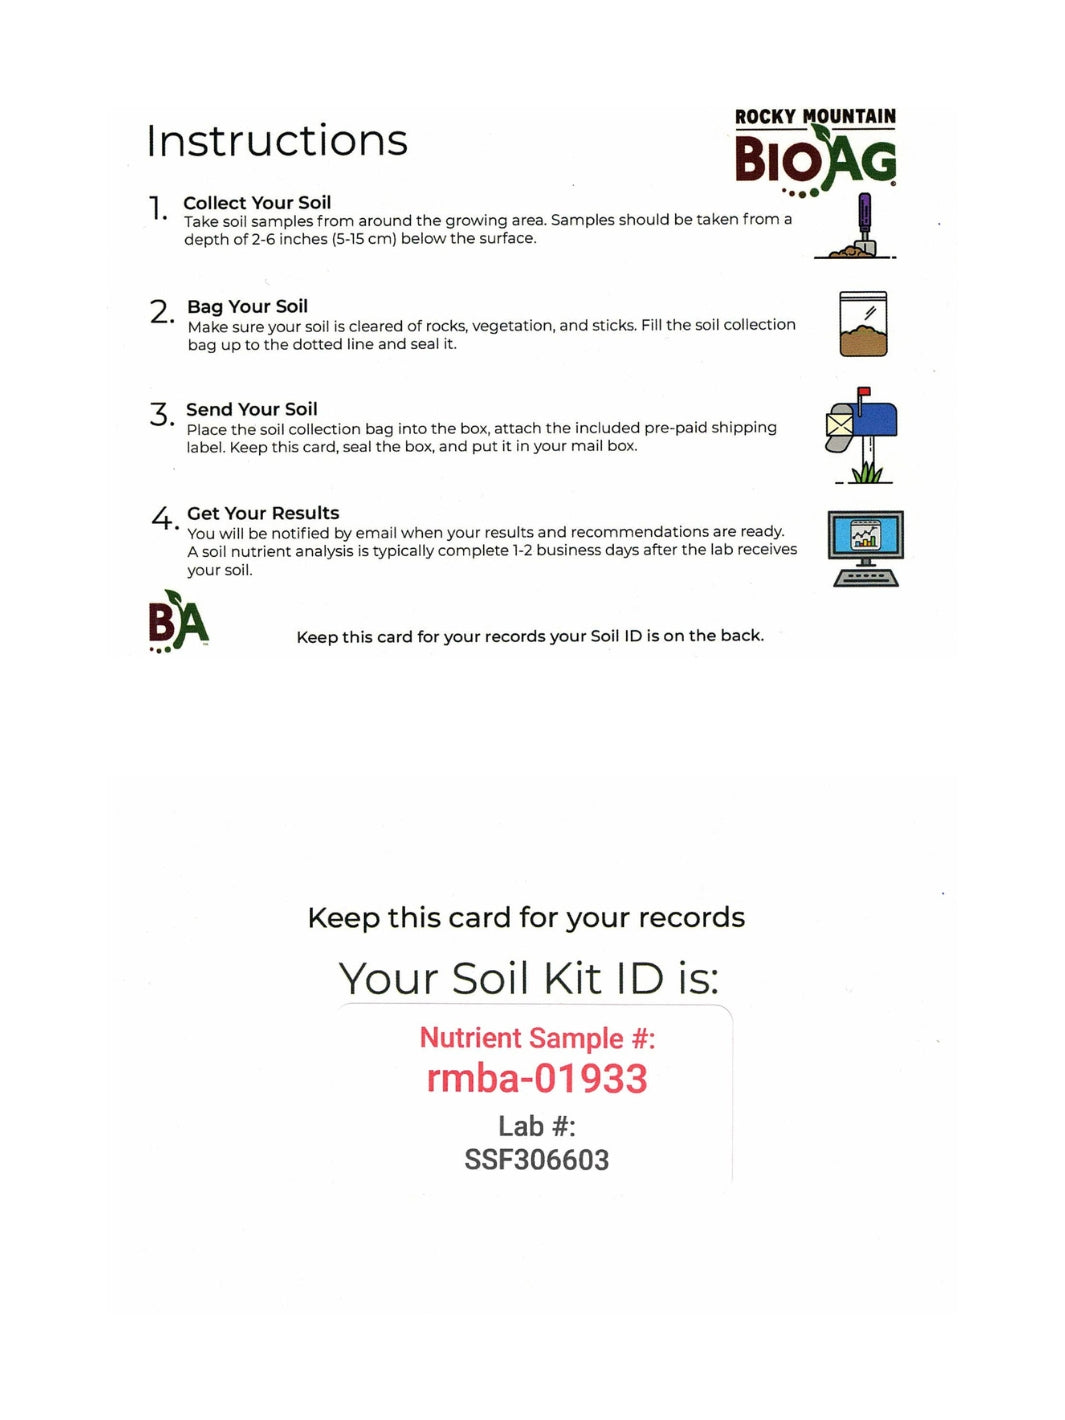 RxSoil Rocky Mountain BioAg Soil Test Kit Instruction Card Front and Back